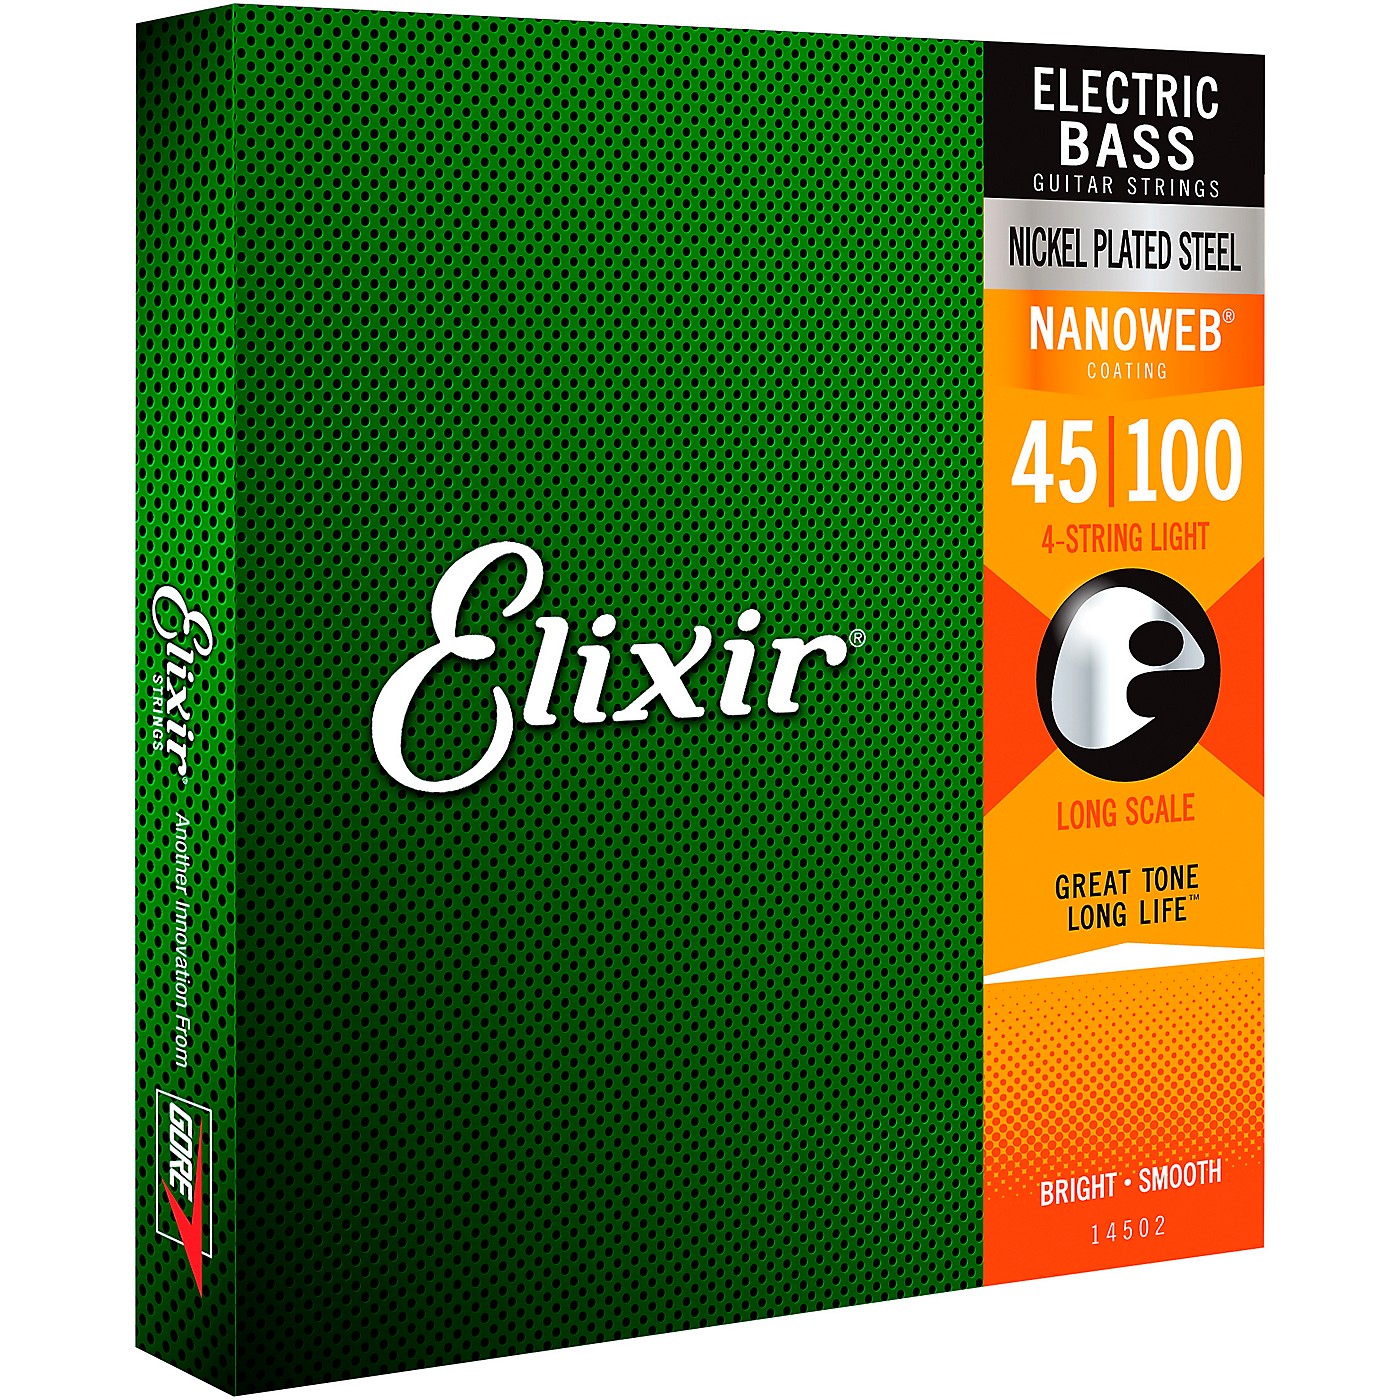 Elixir Nickel-Plated Steel 4-String Bass Strings with NANOWEB Coating, Long Scale, Light (.045-.100) thumbnail